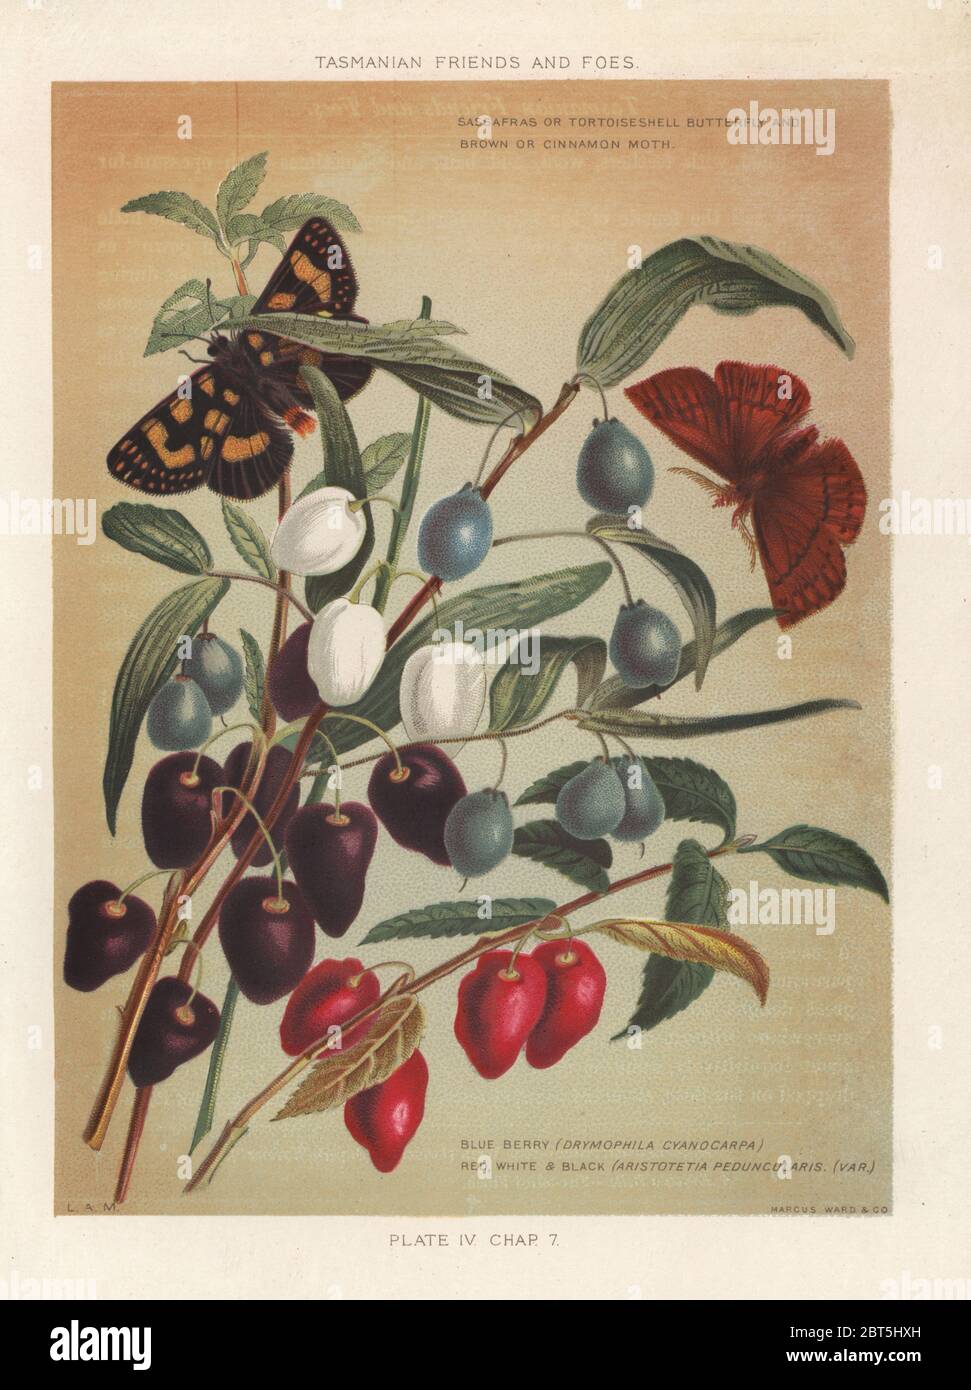 Turquoise berry, Drymophila cyanocarpa, and red, white & black, Aristotelia peduncularis. Moth butterfly, Liphyra brassolis and . (Sassafras or tortoiseshell butterfly and brown or cinnamon moth.) Chromolithograph after an illustration by Louisa Anne Meredith from her book Tasmanian Friends and Foes, Feathered, Furred and Finned, Marcus Ward, London, 1881. Stock Photo